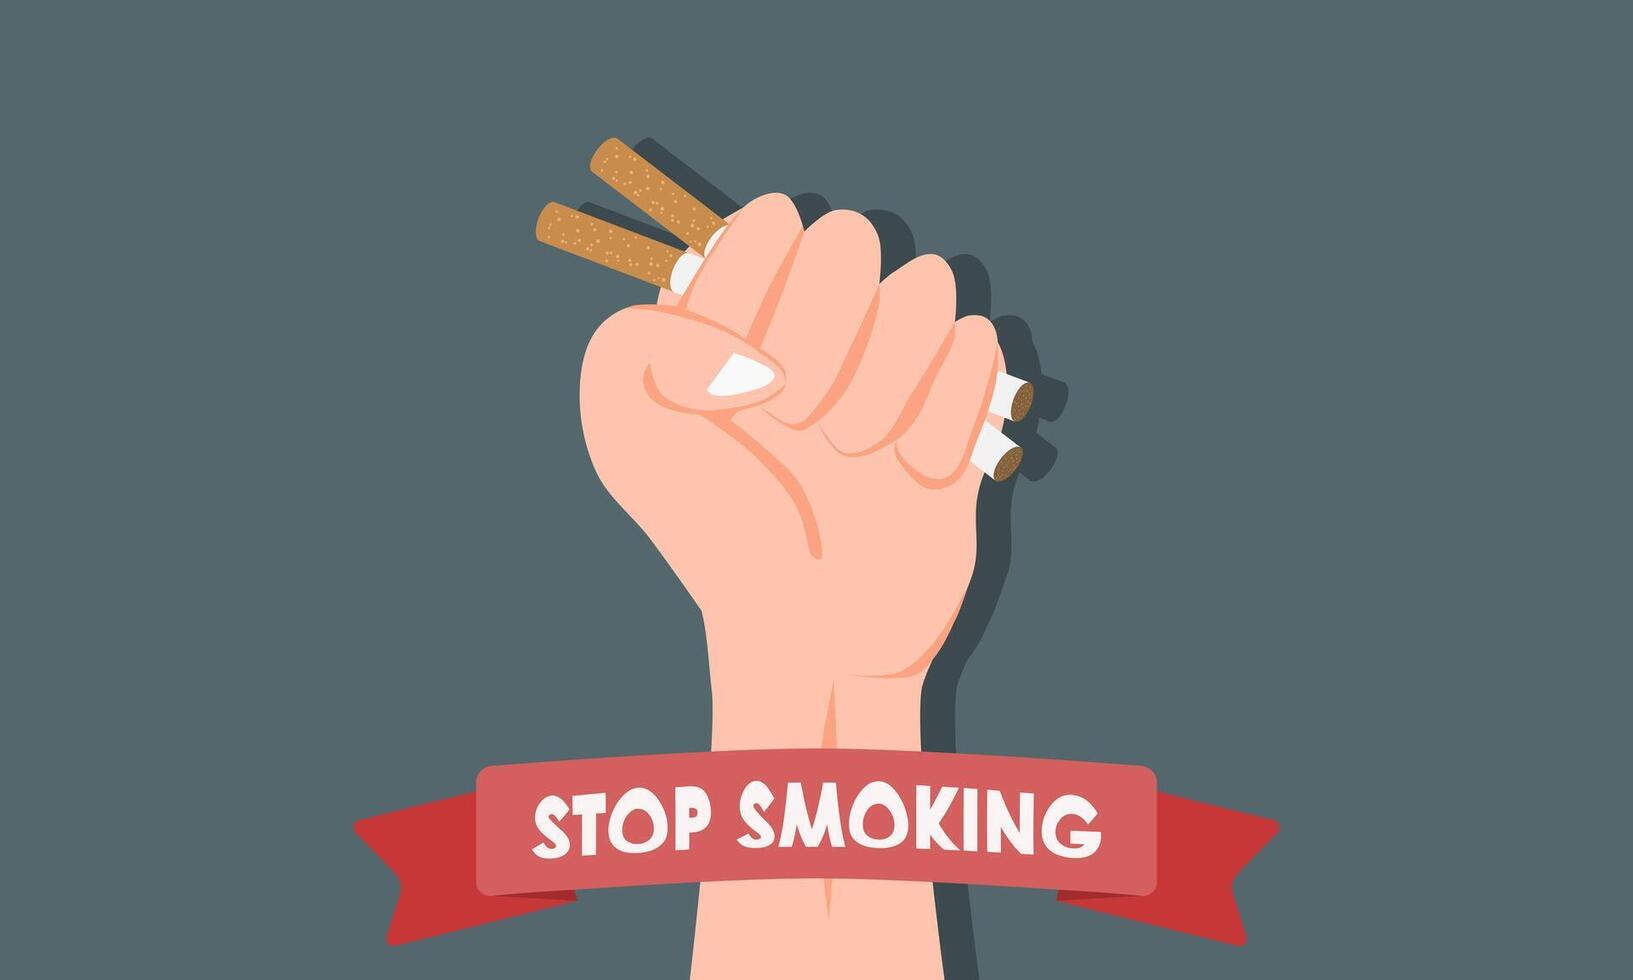 Stop smoking concept. Hand crushing or holding the cigarette. World No Tobacco Day concept design. Vector illustration.